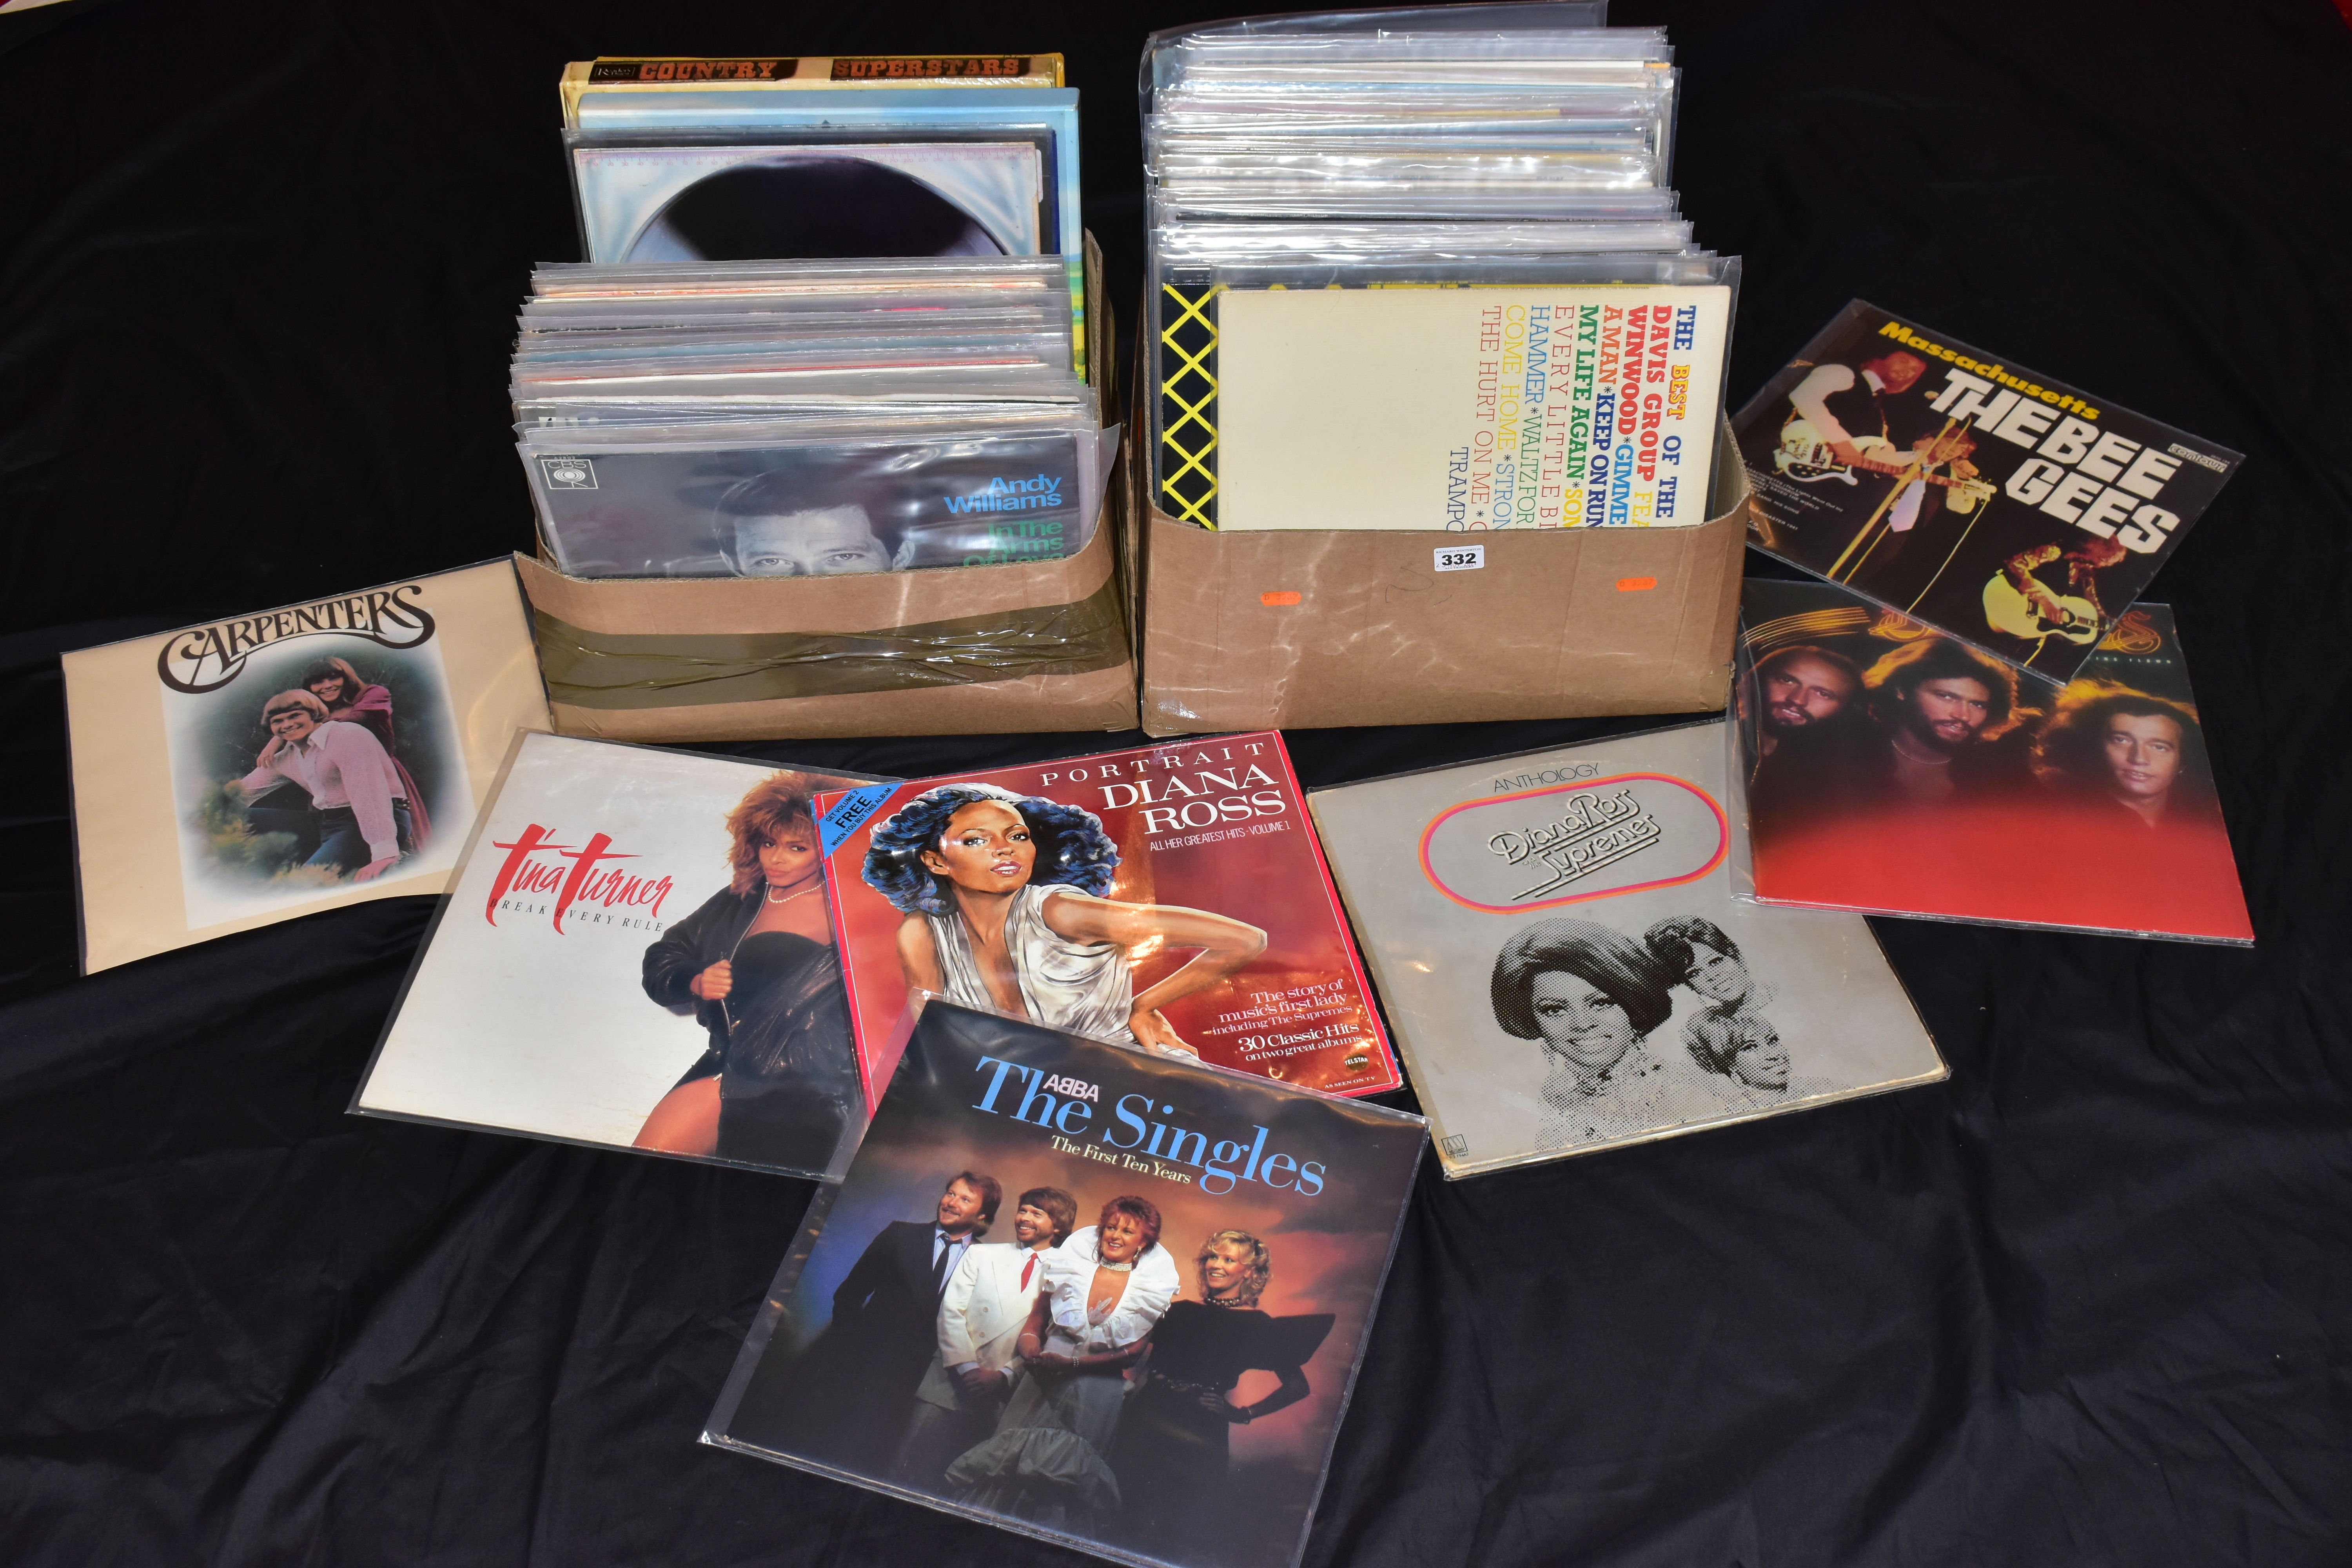 TWO TRAY CONTAINING OVER ONE HUNDRED LPs by artists such as Billy Joel, Abba, the Travelling